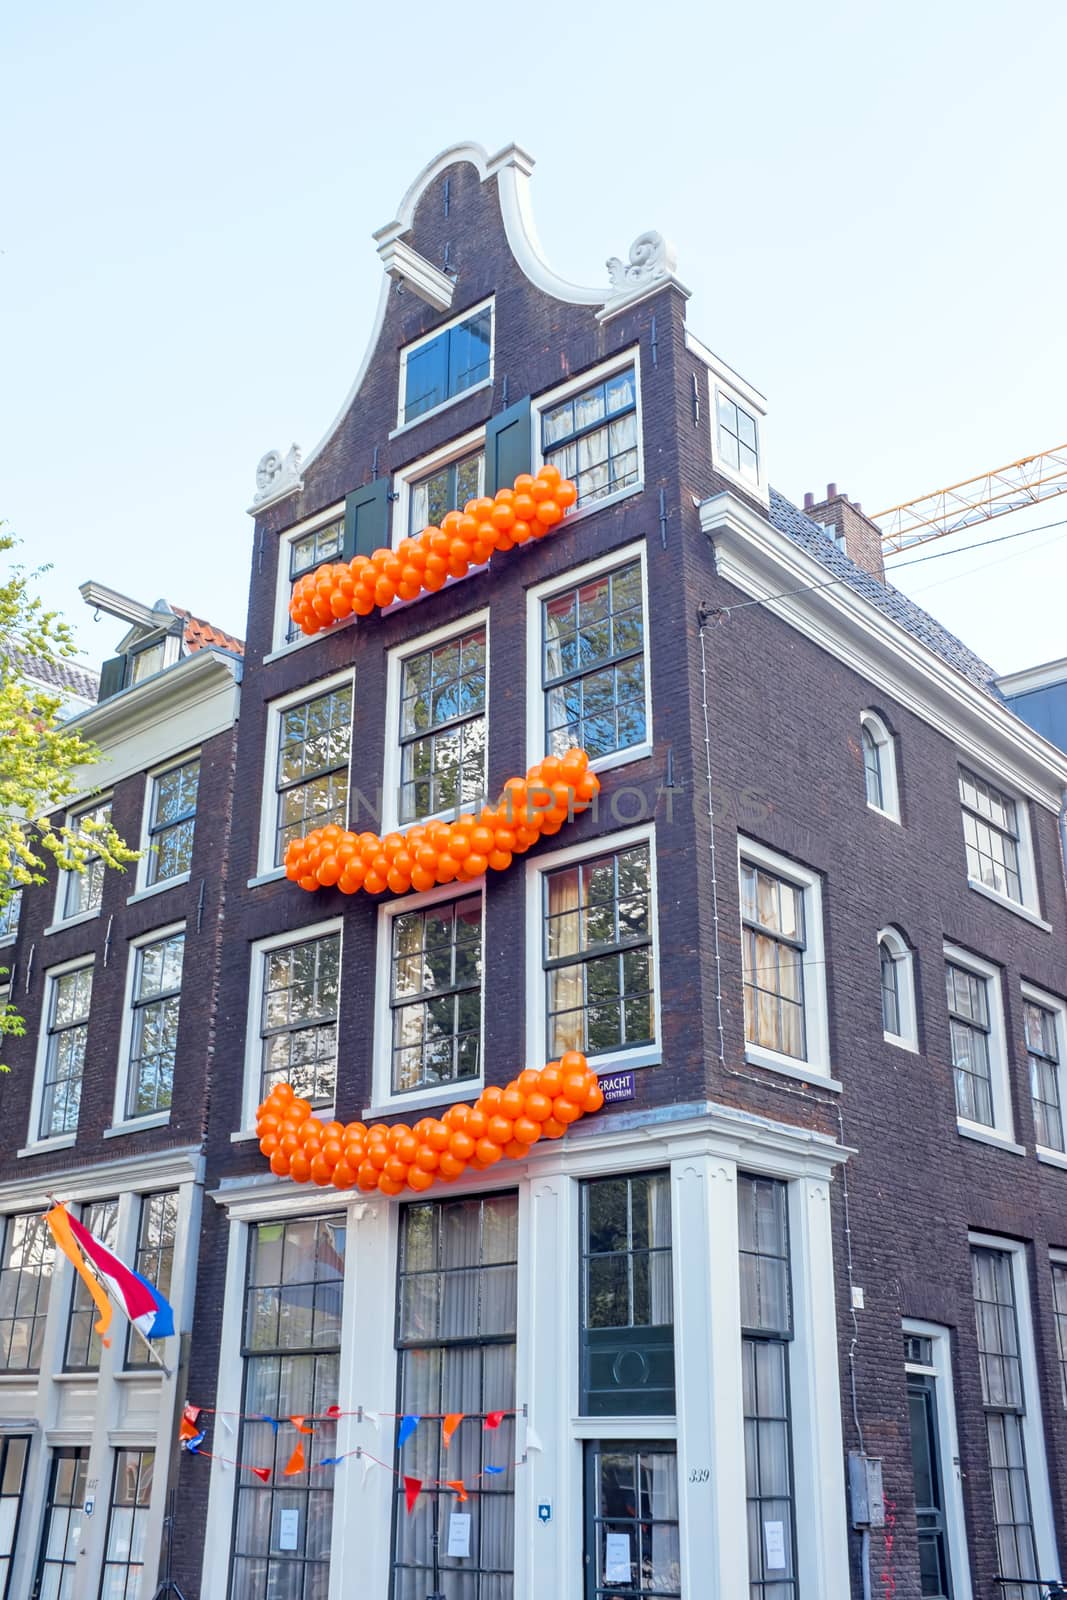 Traditional dutch house decorated on Kings day in Amsterdam the Netherlands